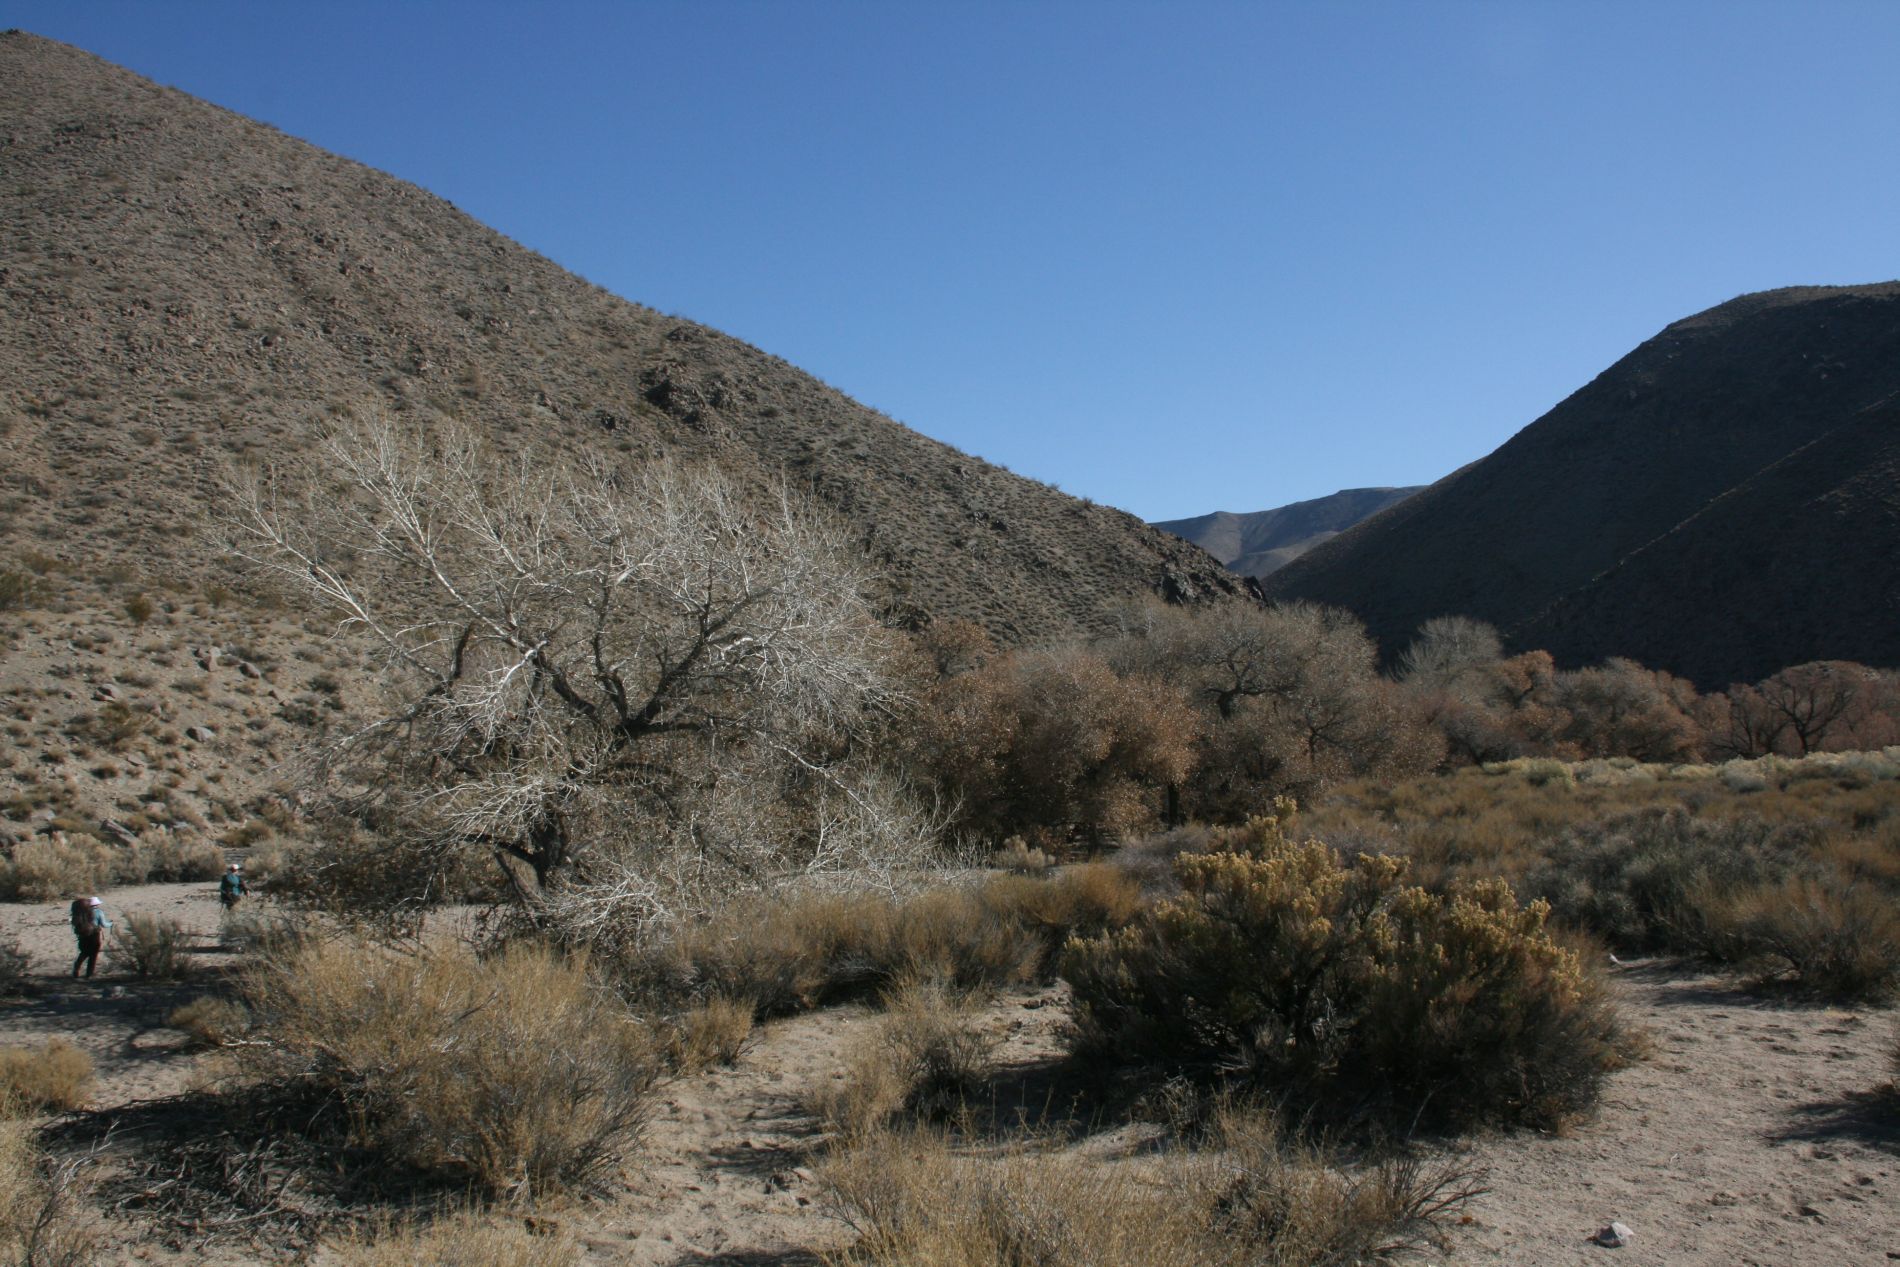 Hikers approach Cottonwood Springs in Death Valley.